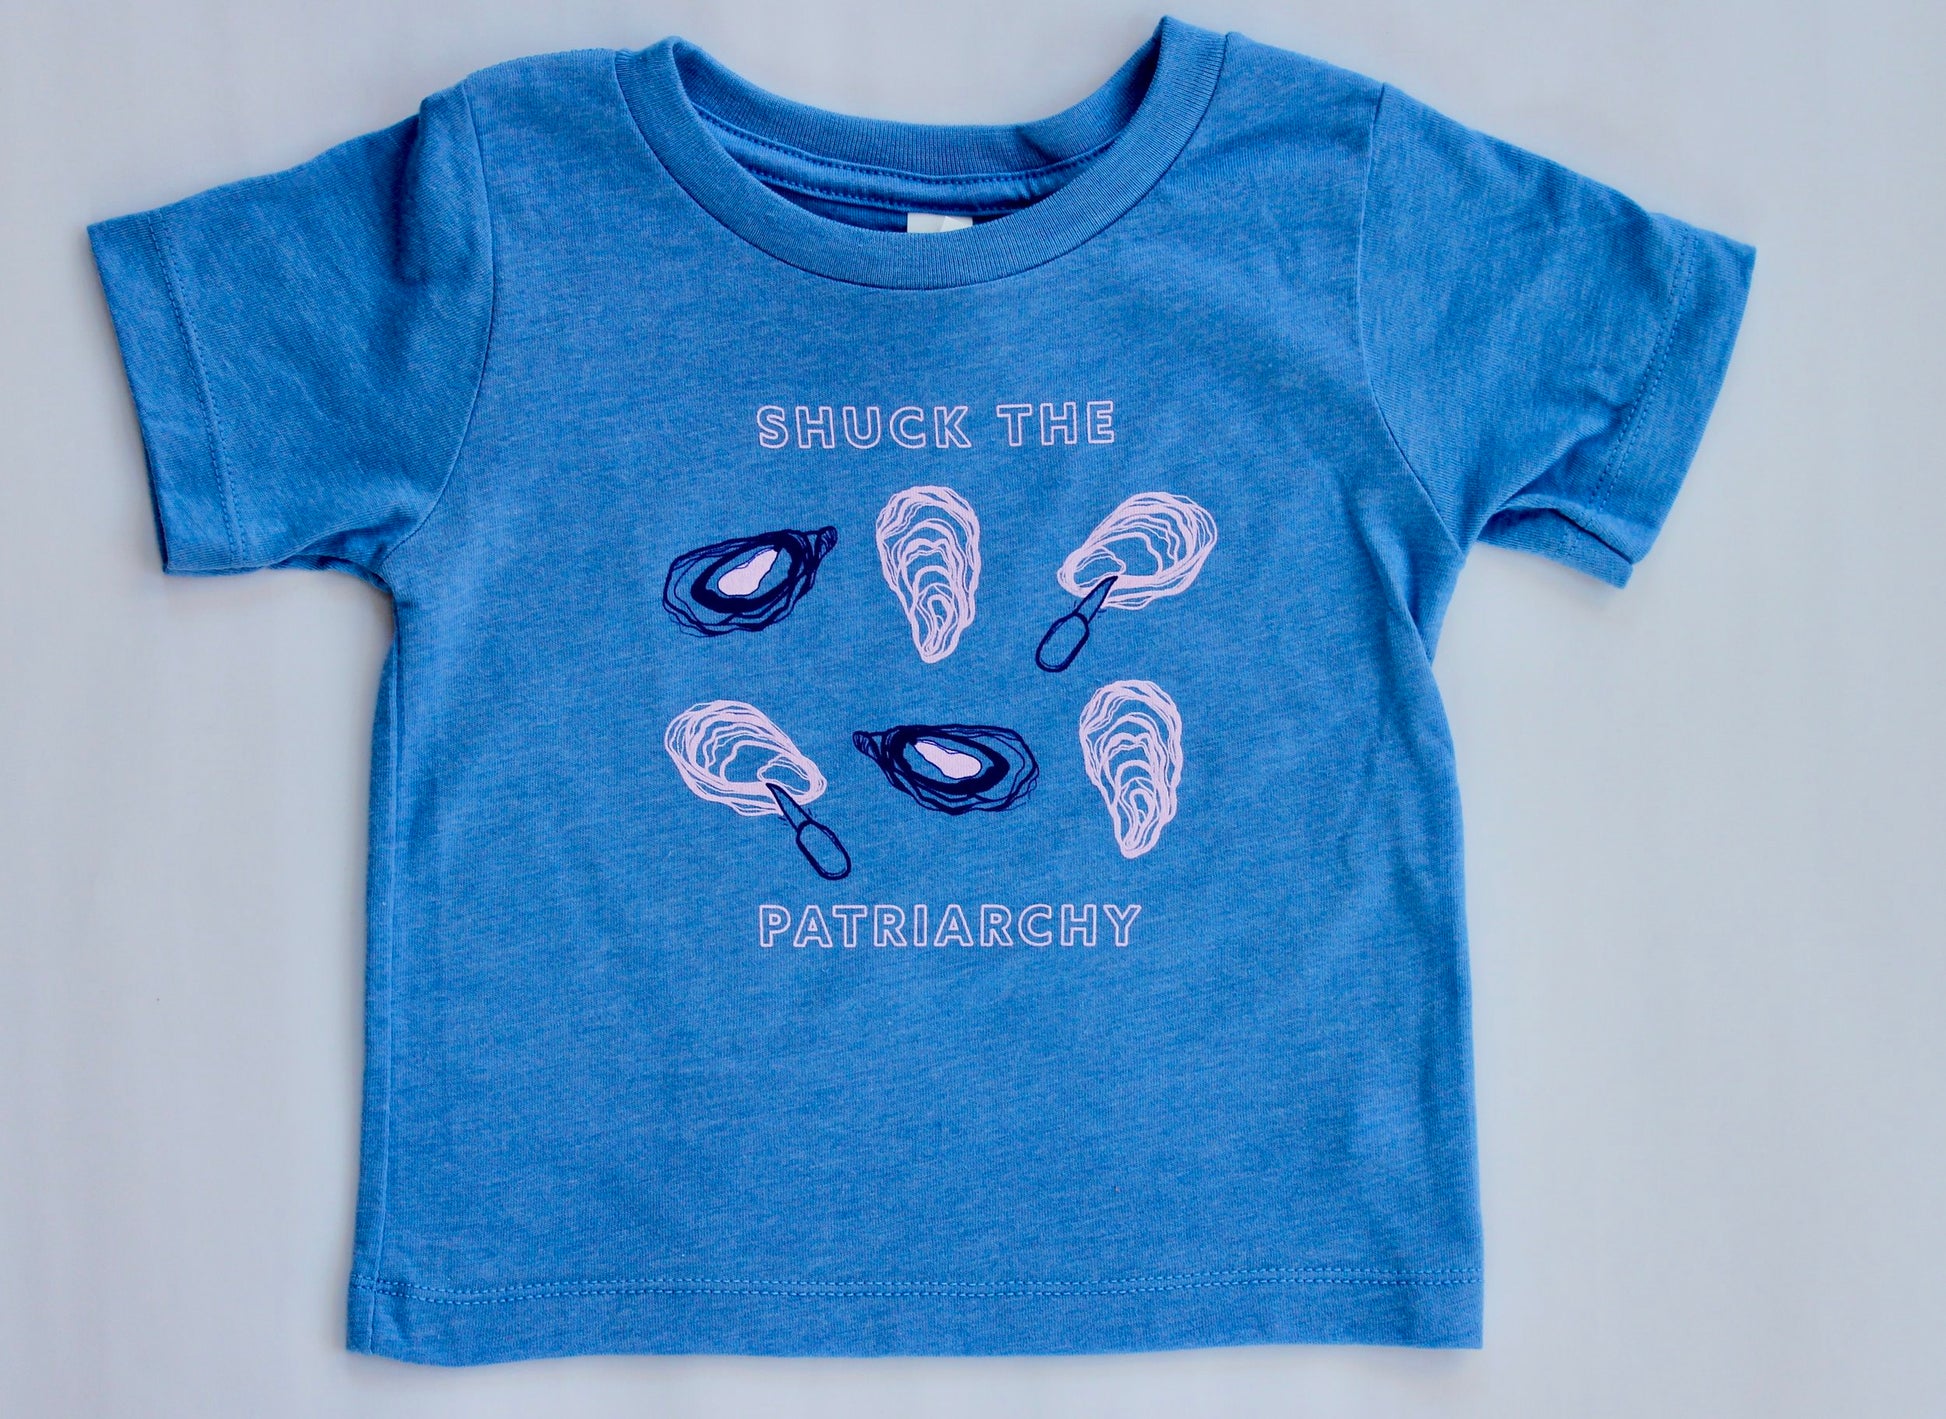 A baby sized tee in bright blue reads "Shuck the Patriarchy" in block letters with oyster illustrations 